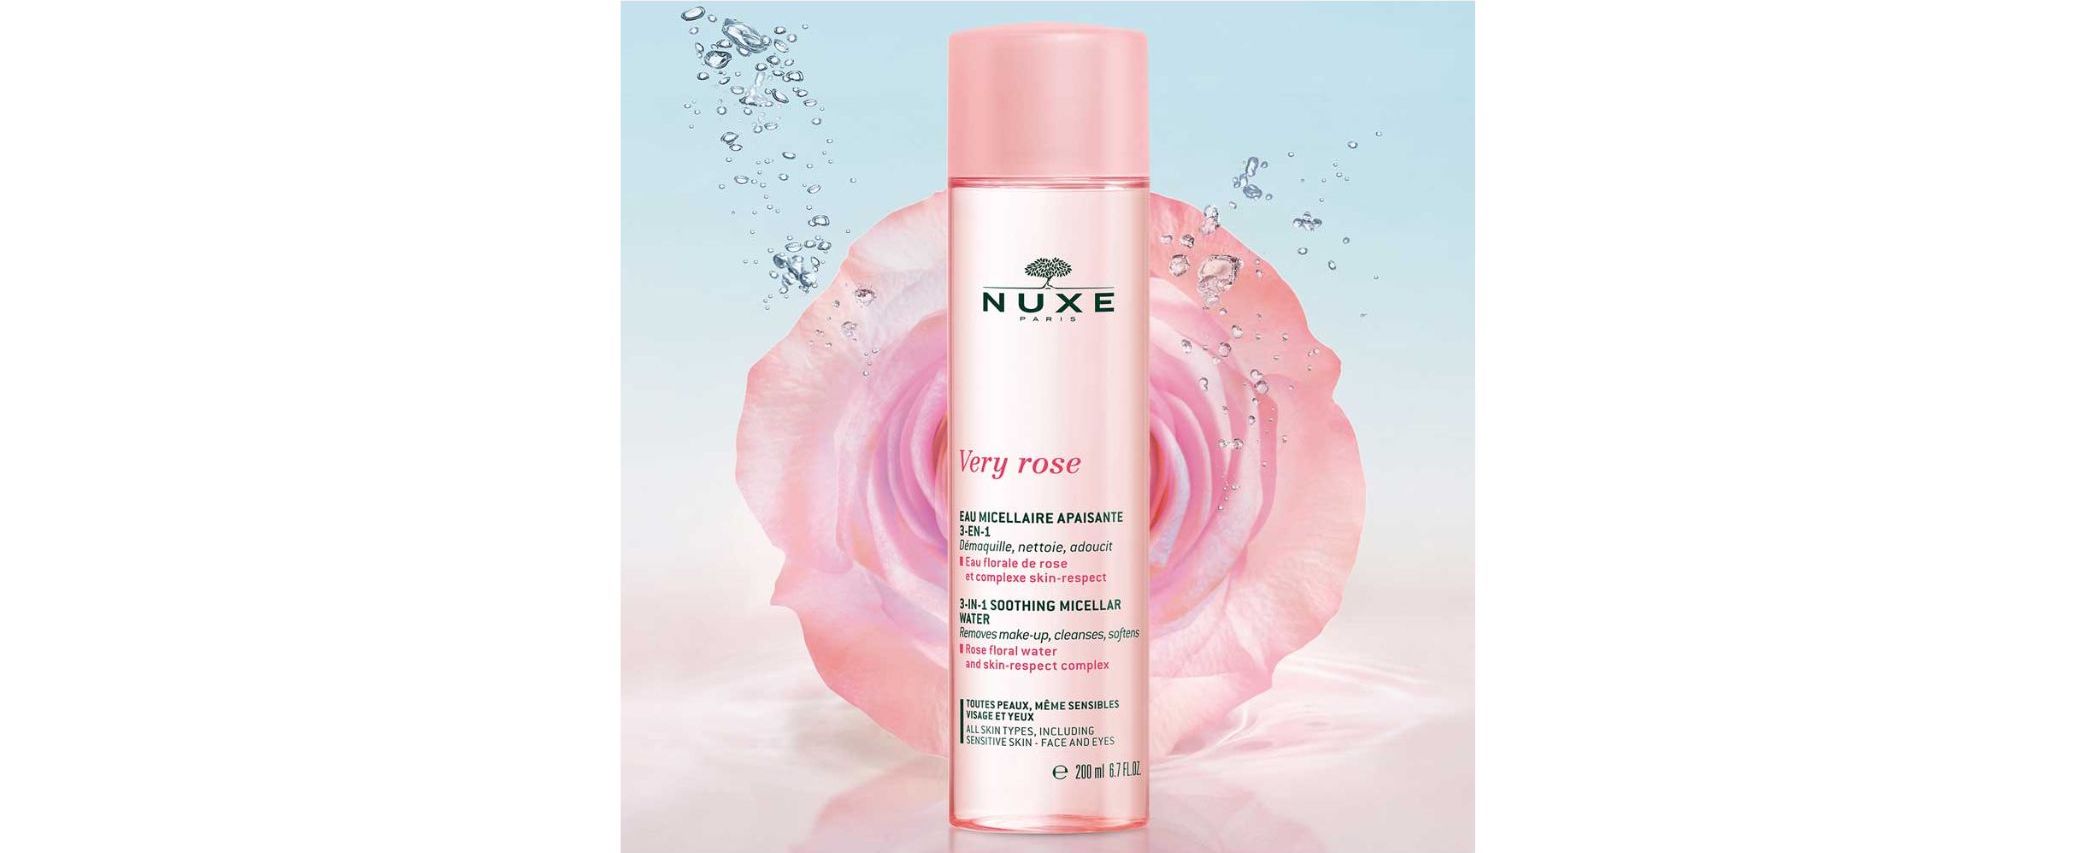 Nuxe, very, rose, Soothing, Micellar, water,